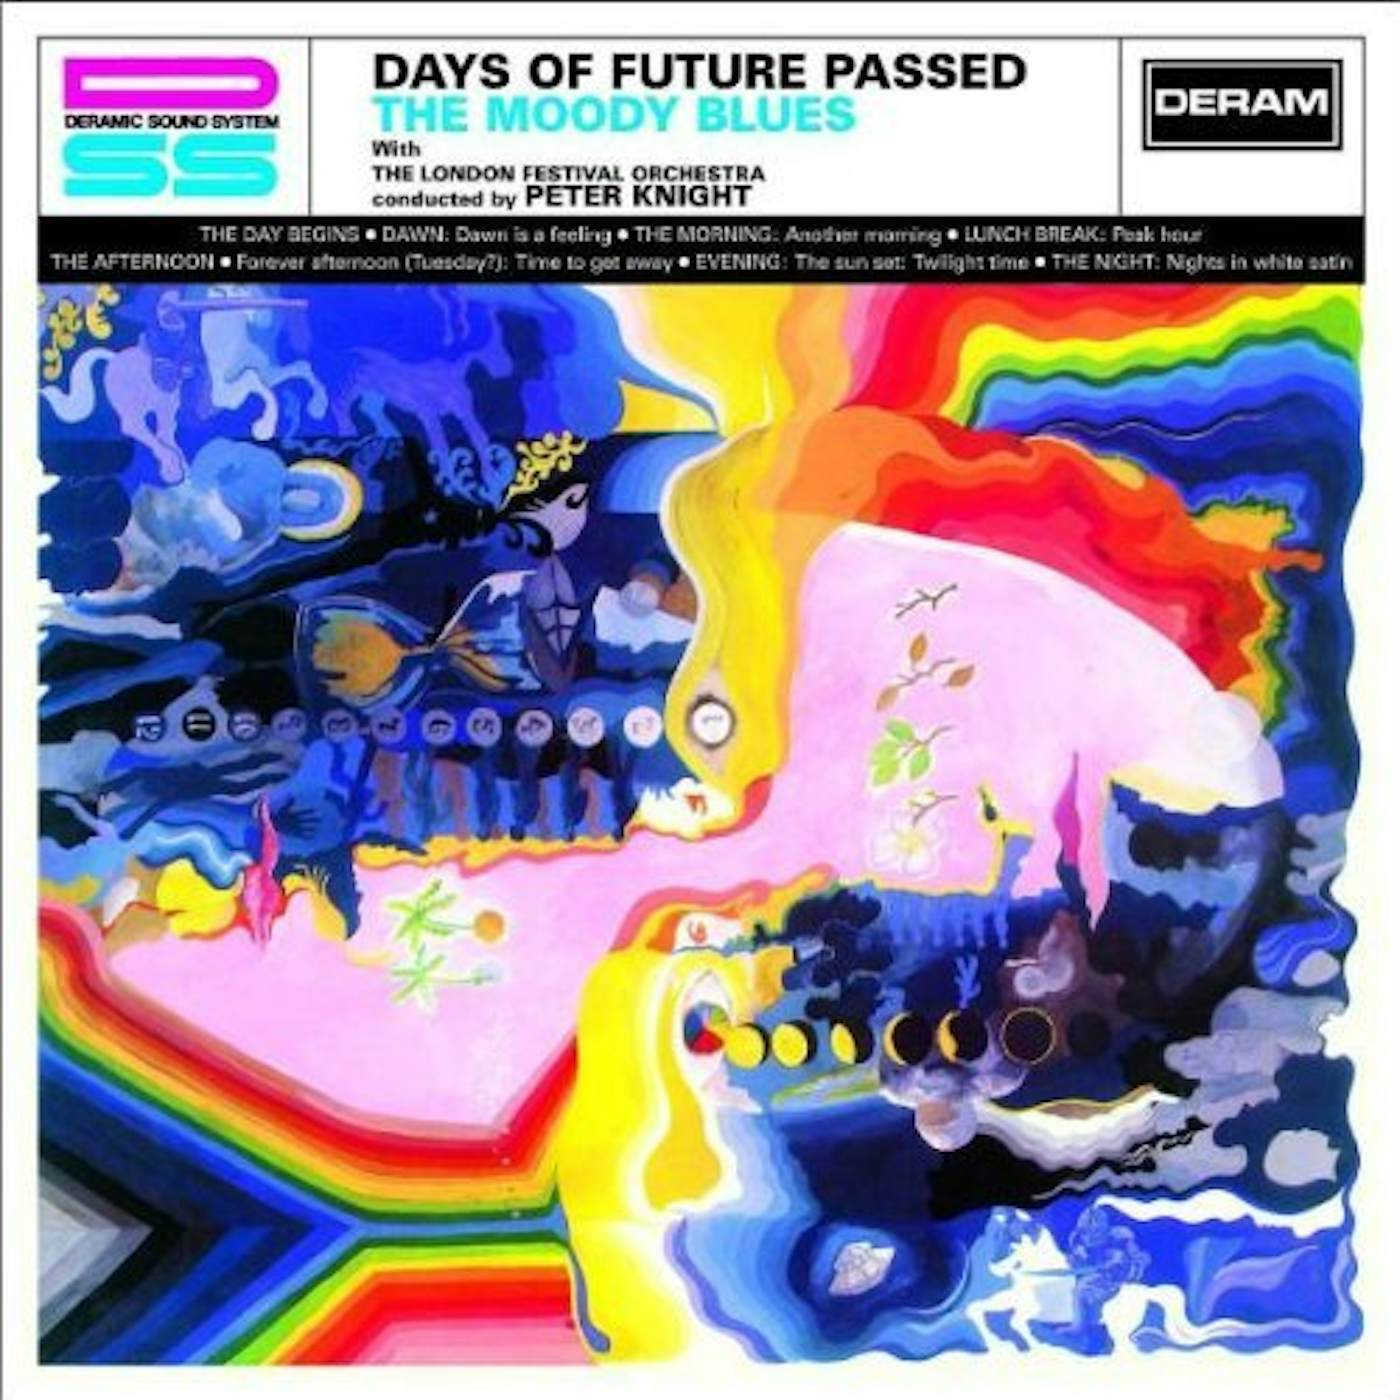 The Moody Blues DAYS OF FUTURE PASSED CD